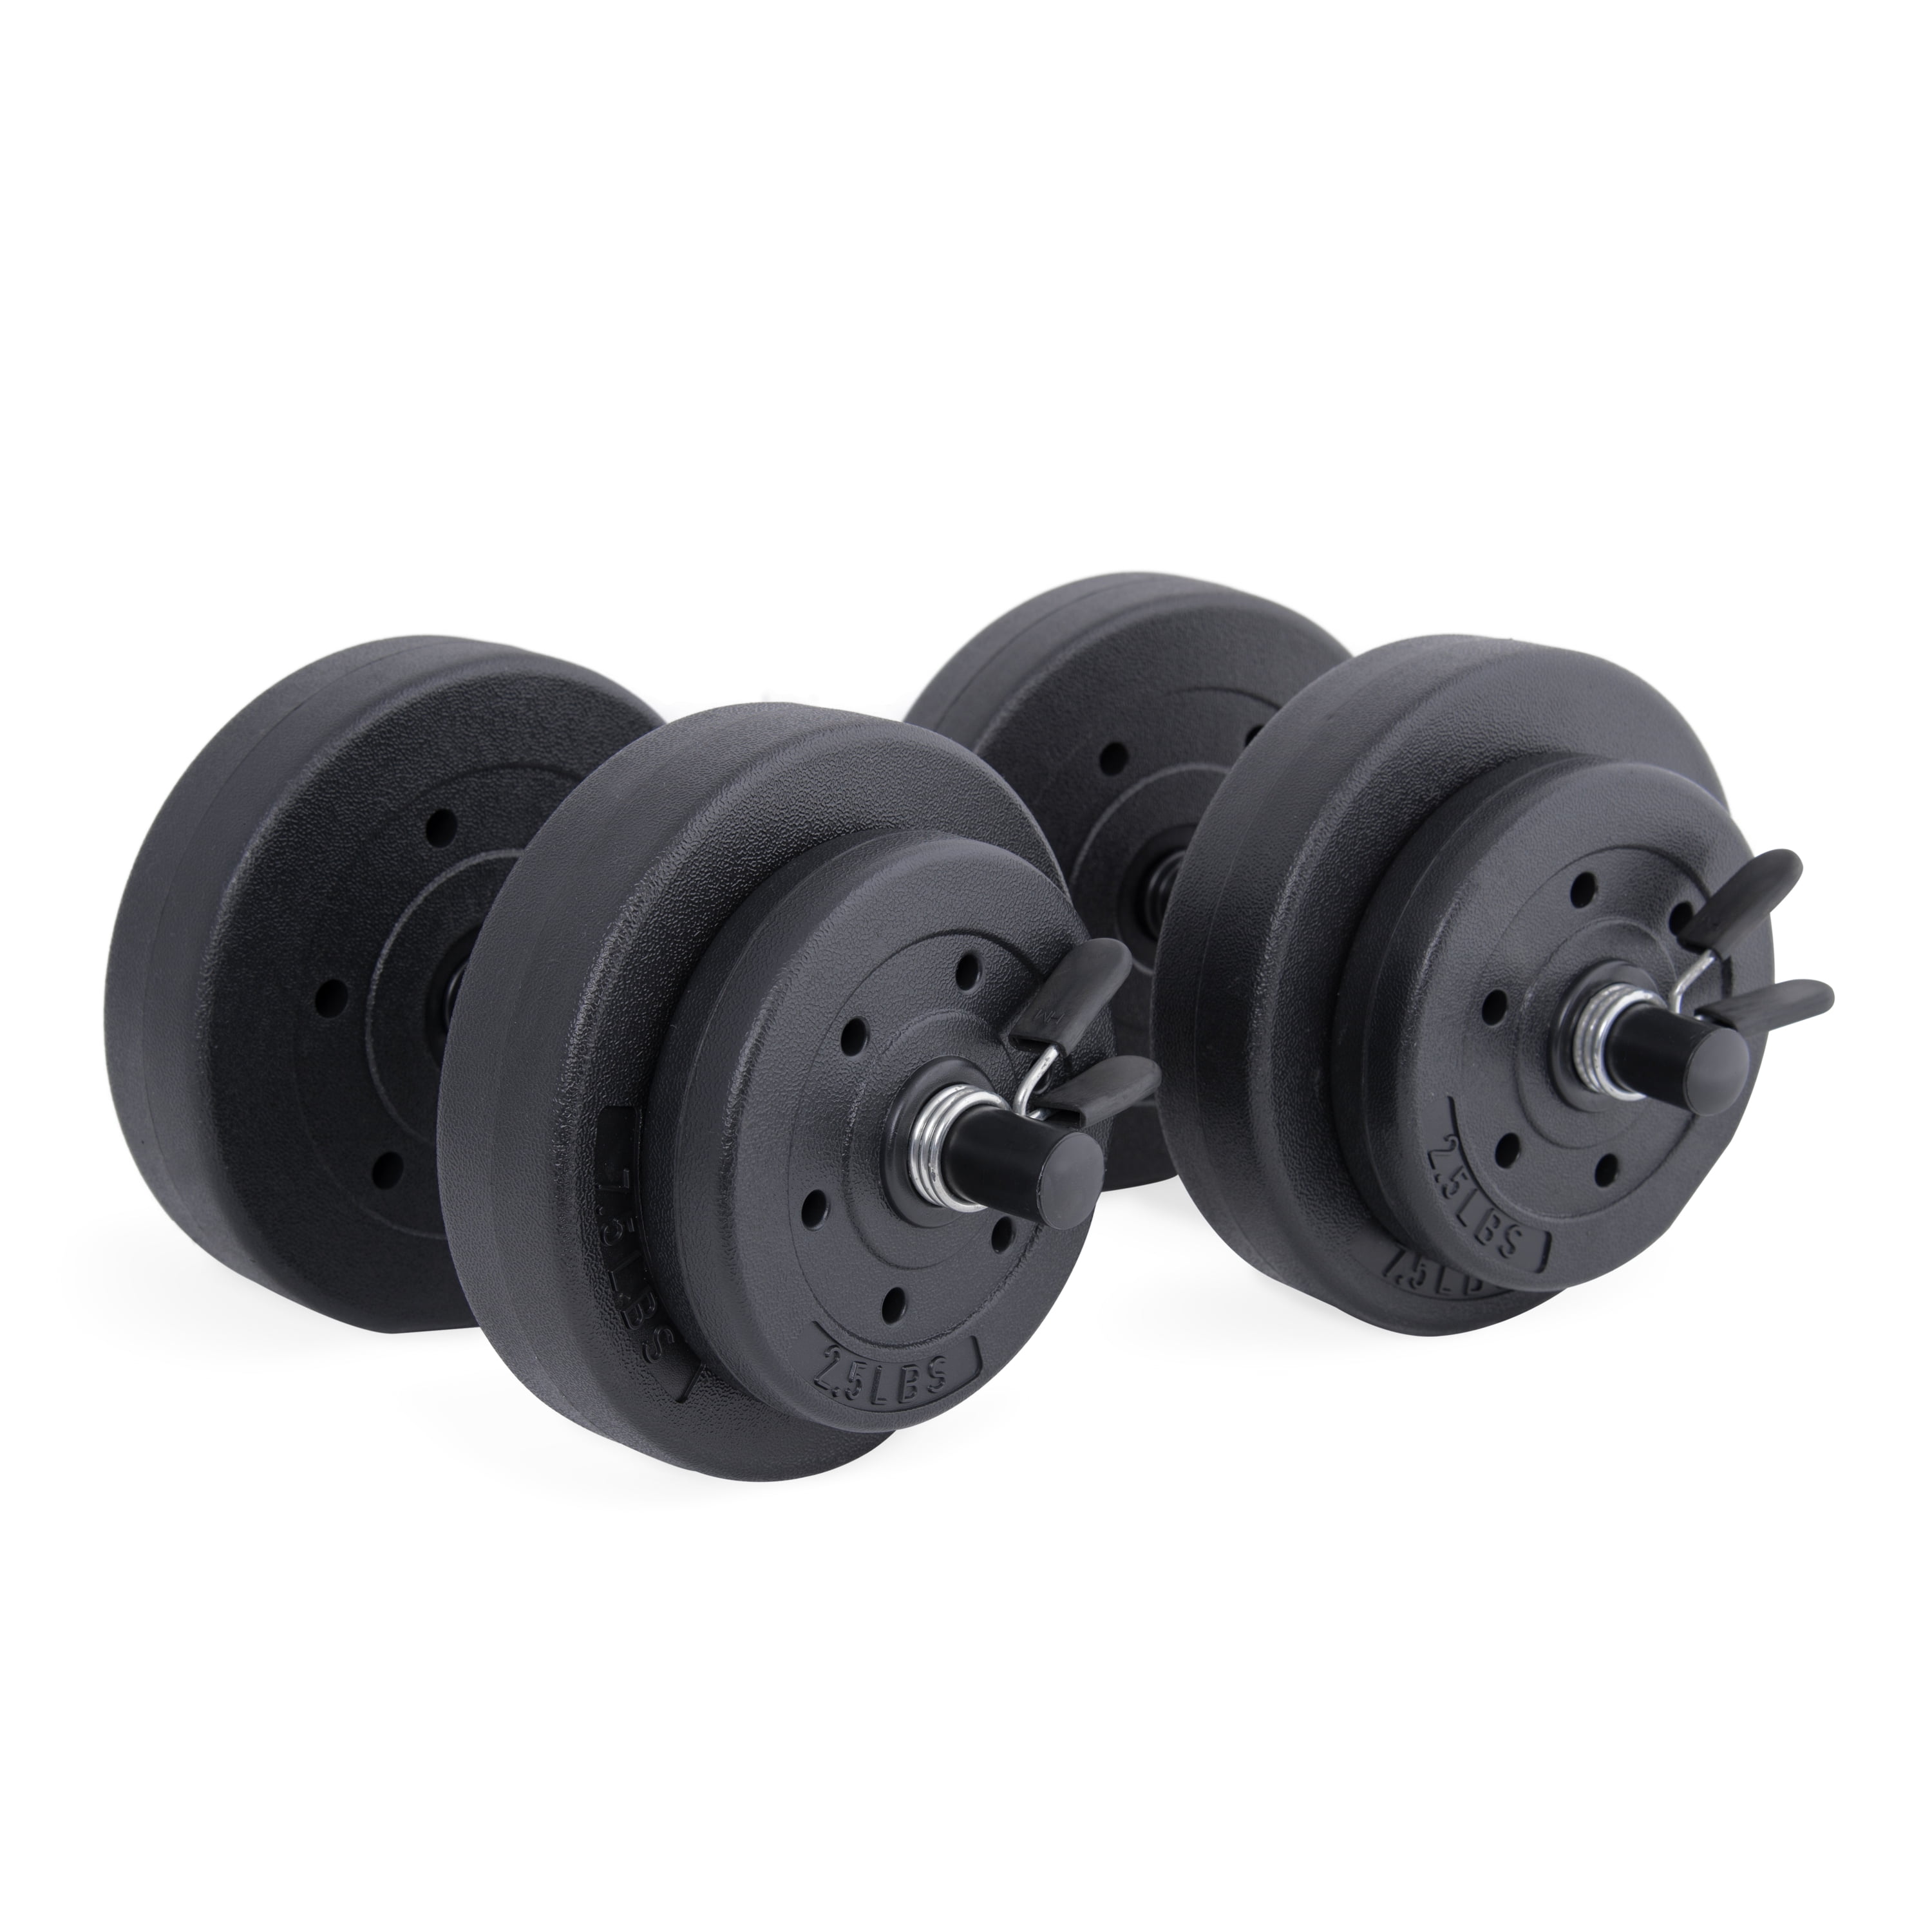 In Hand CAP Dumbbell 40 lb Adjustable Vinyl Set Ready to Ship FAST SHIPPING 